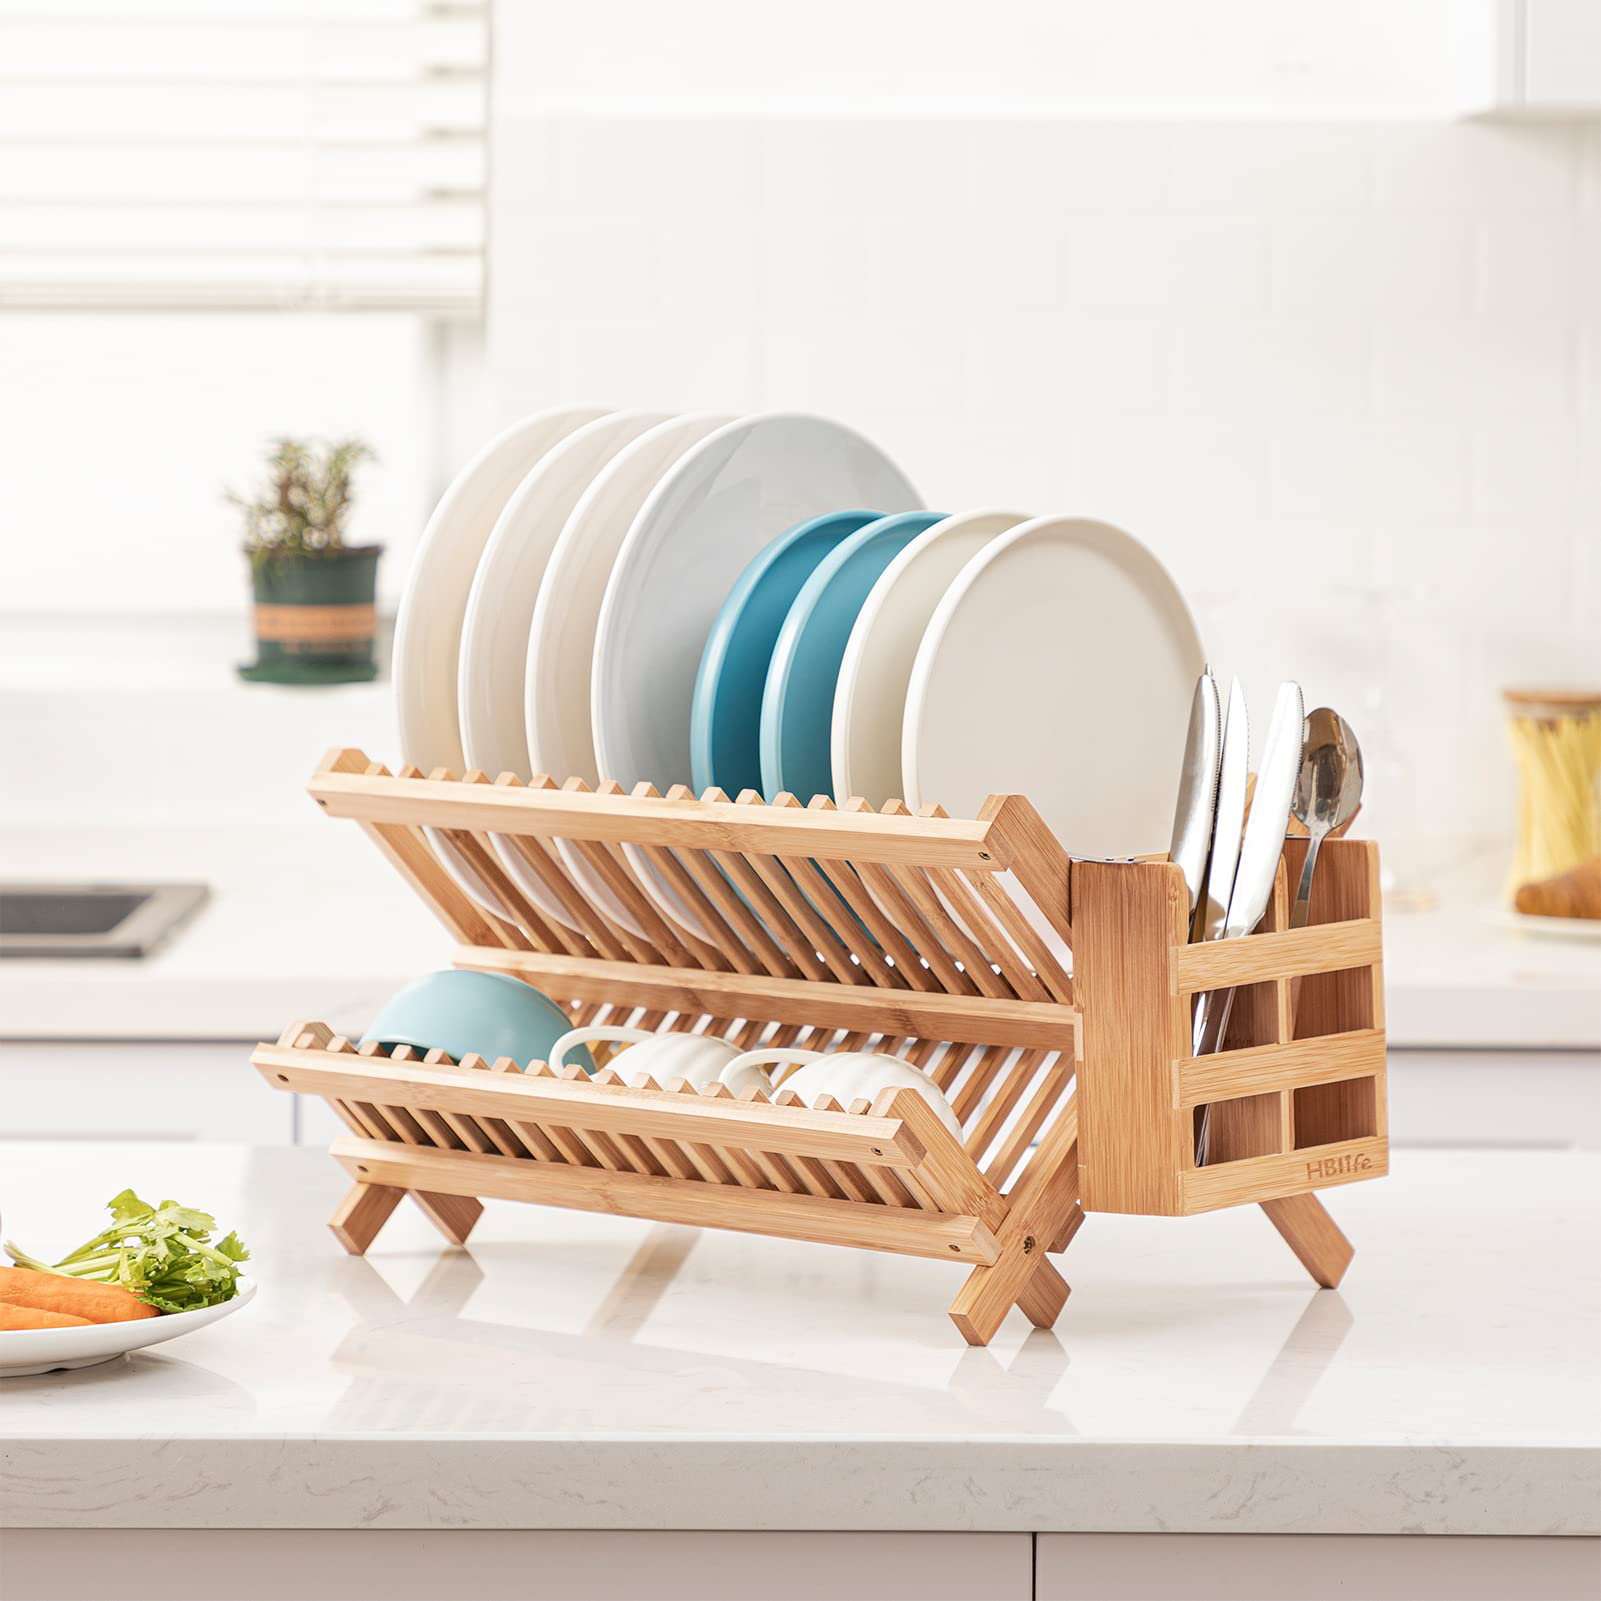 2 Tier Dish Drying Rack - Collapsible Dish Drainer Rack and Best Dish Holder  for Kitchen Countertop by Royal Craft Wood 